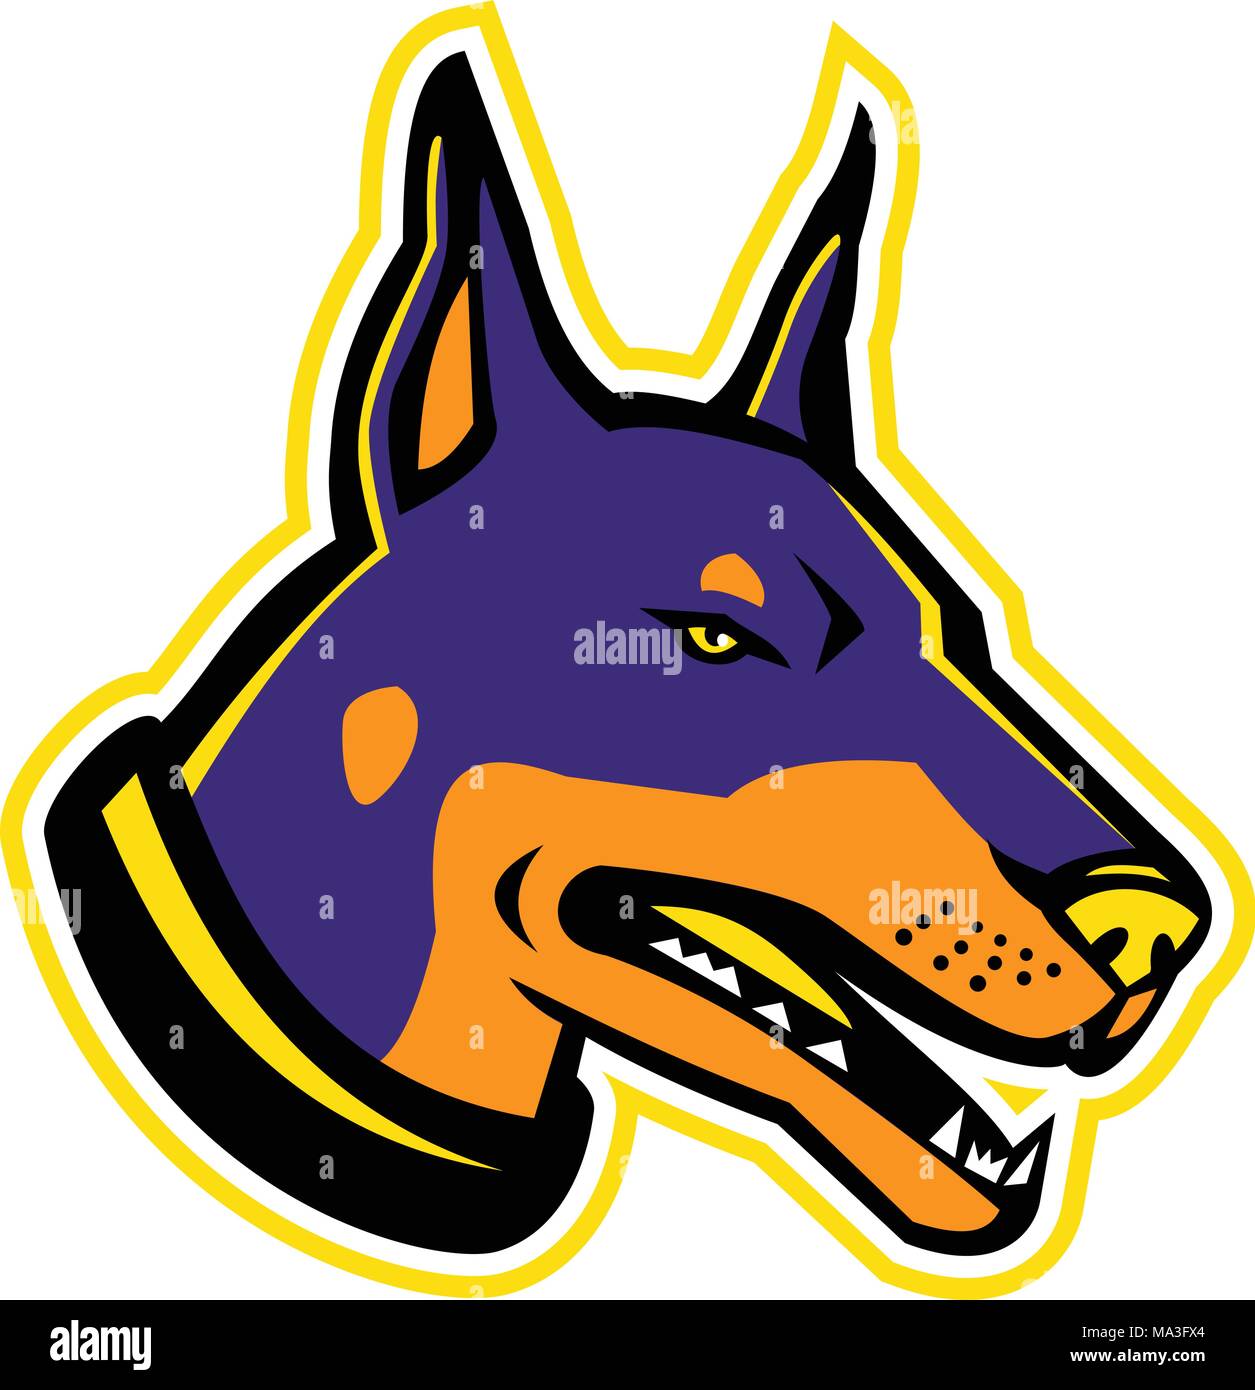 Mascot icon illustration of head of a Dobermann or Doberman Pinscher, a medium-large breed of domestic dog originally developed as guard dog on . Stock Vector